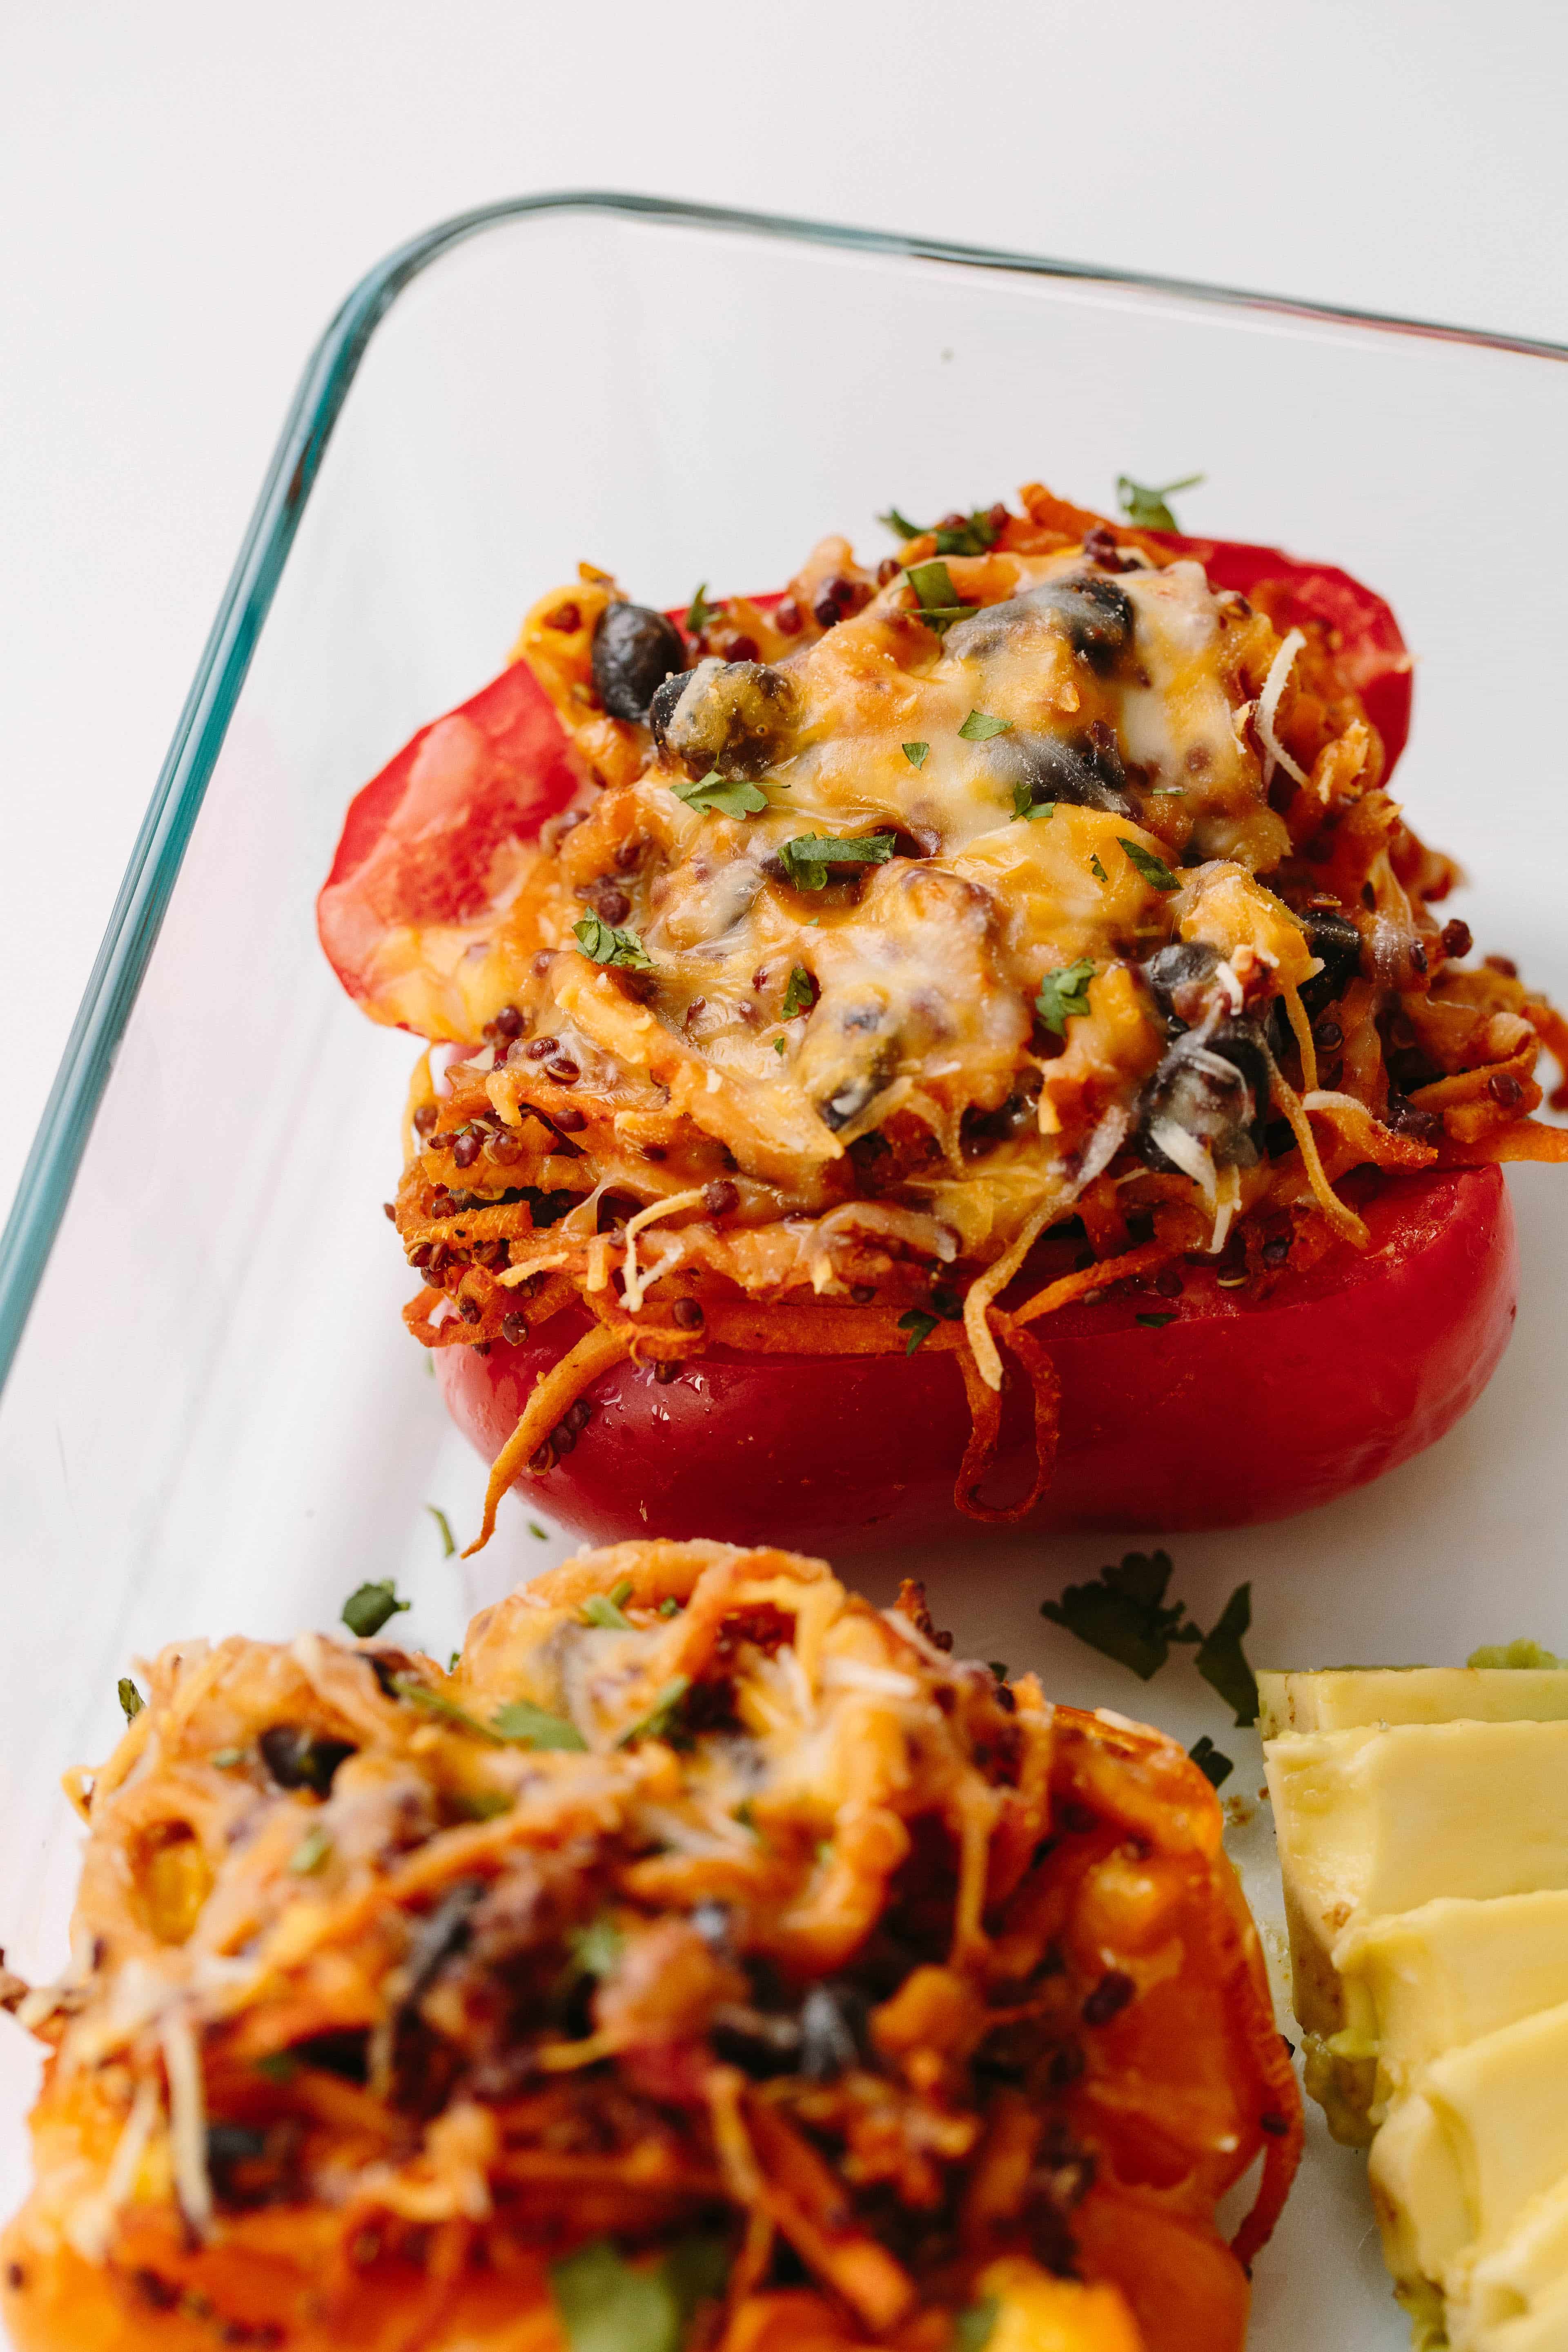 Southwest Quinoa and Spiralized Sweet Potato Stuffed Bell Peppers